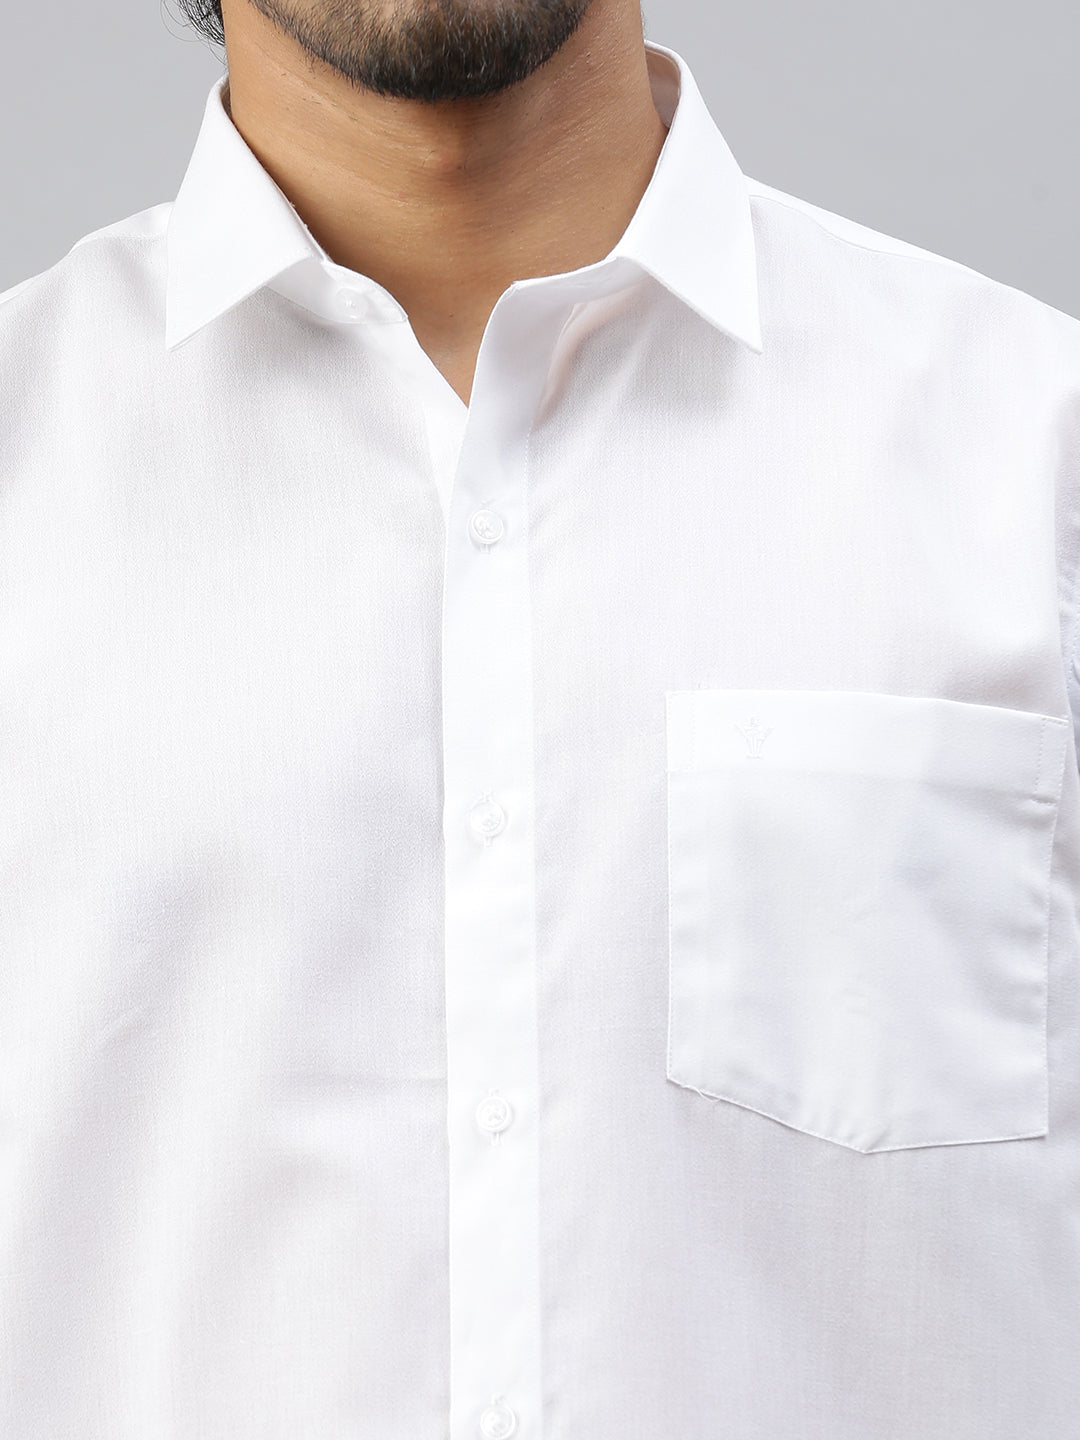 Mens Poly Cotton Full Sleeves Prestigious Fit White Shirt Minister -Zoom view